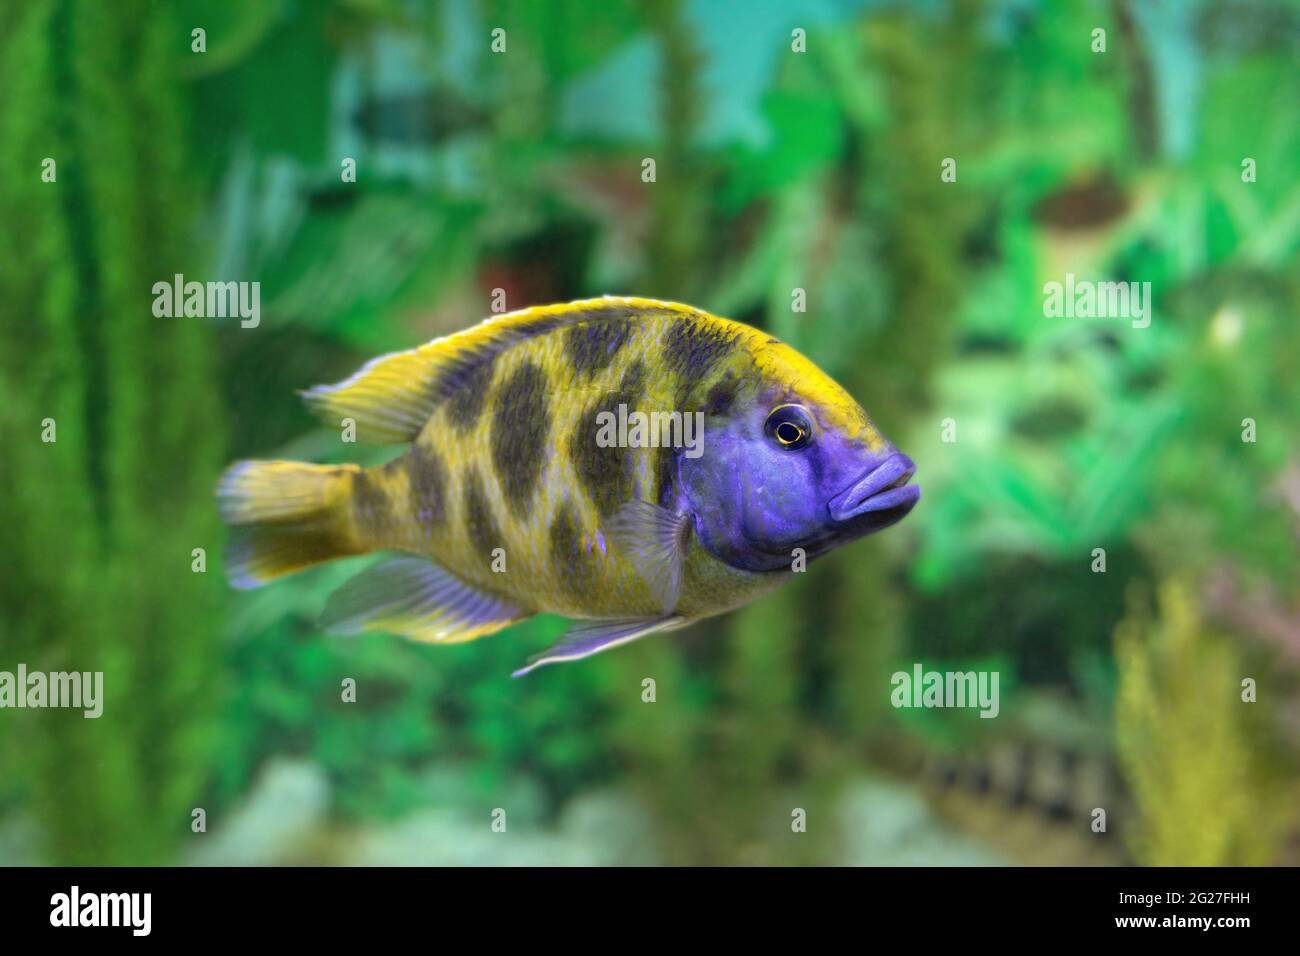 Close-up of exotics yellow blue cichlid fish swimming towards on blurry natural background. Communication with pet or favorite aquarium fish. Stock Photo